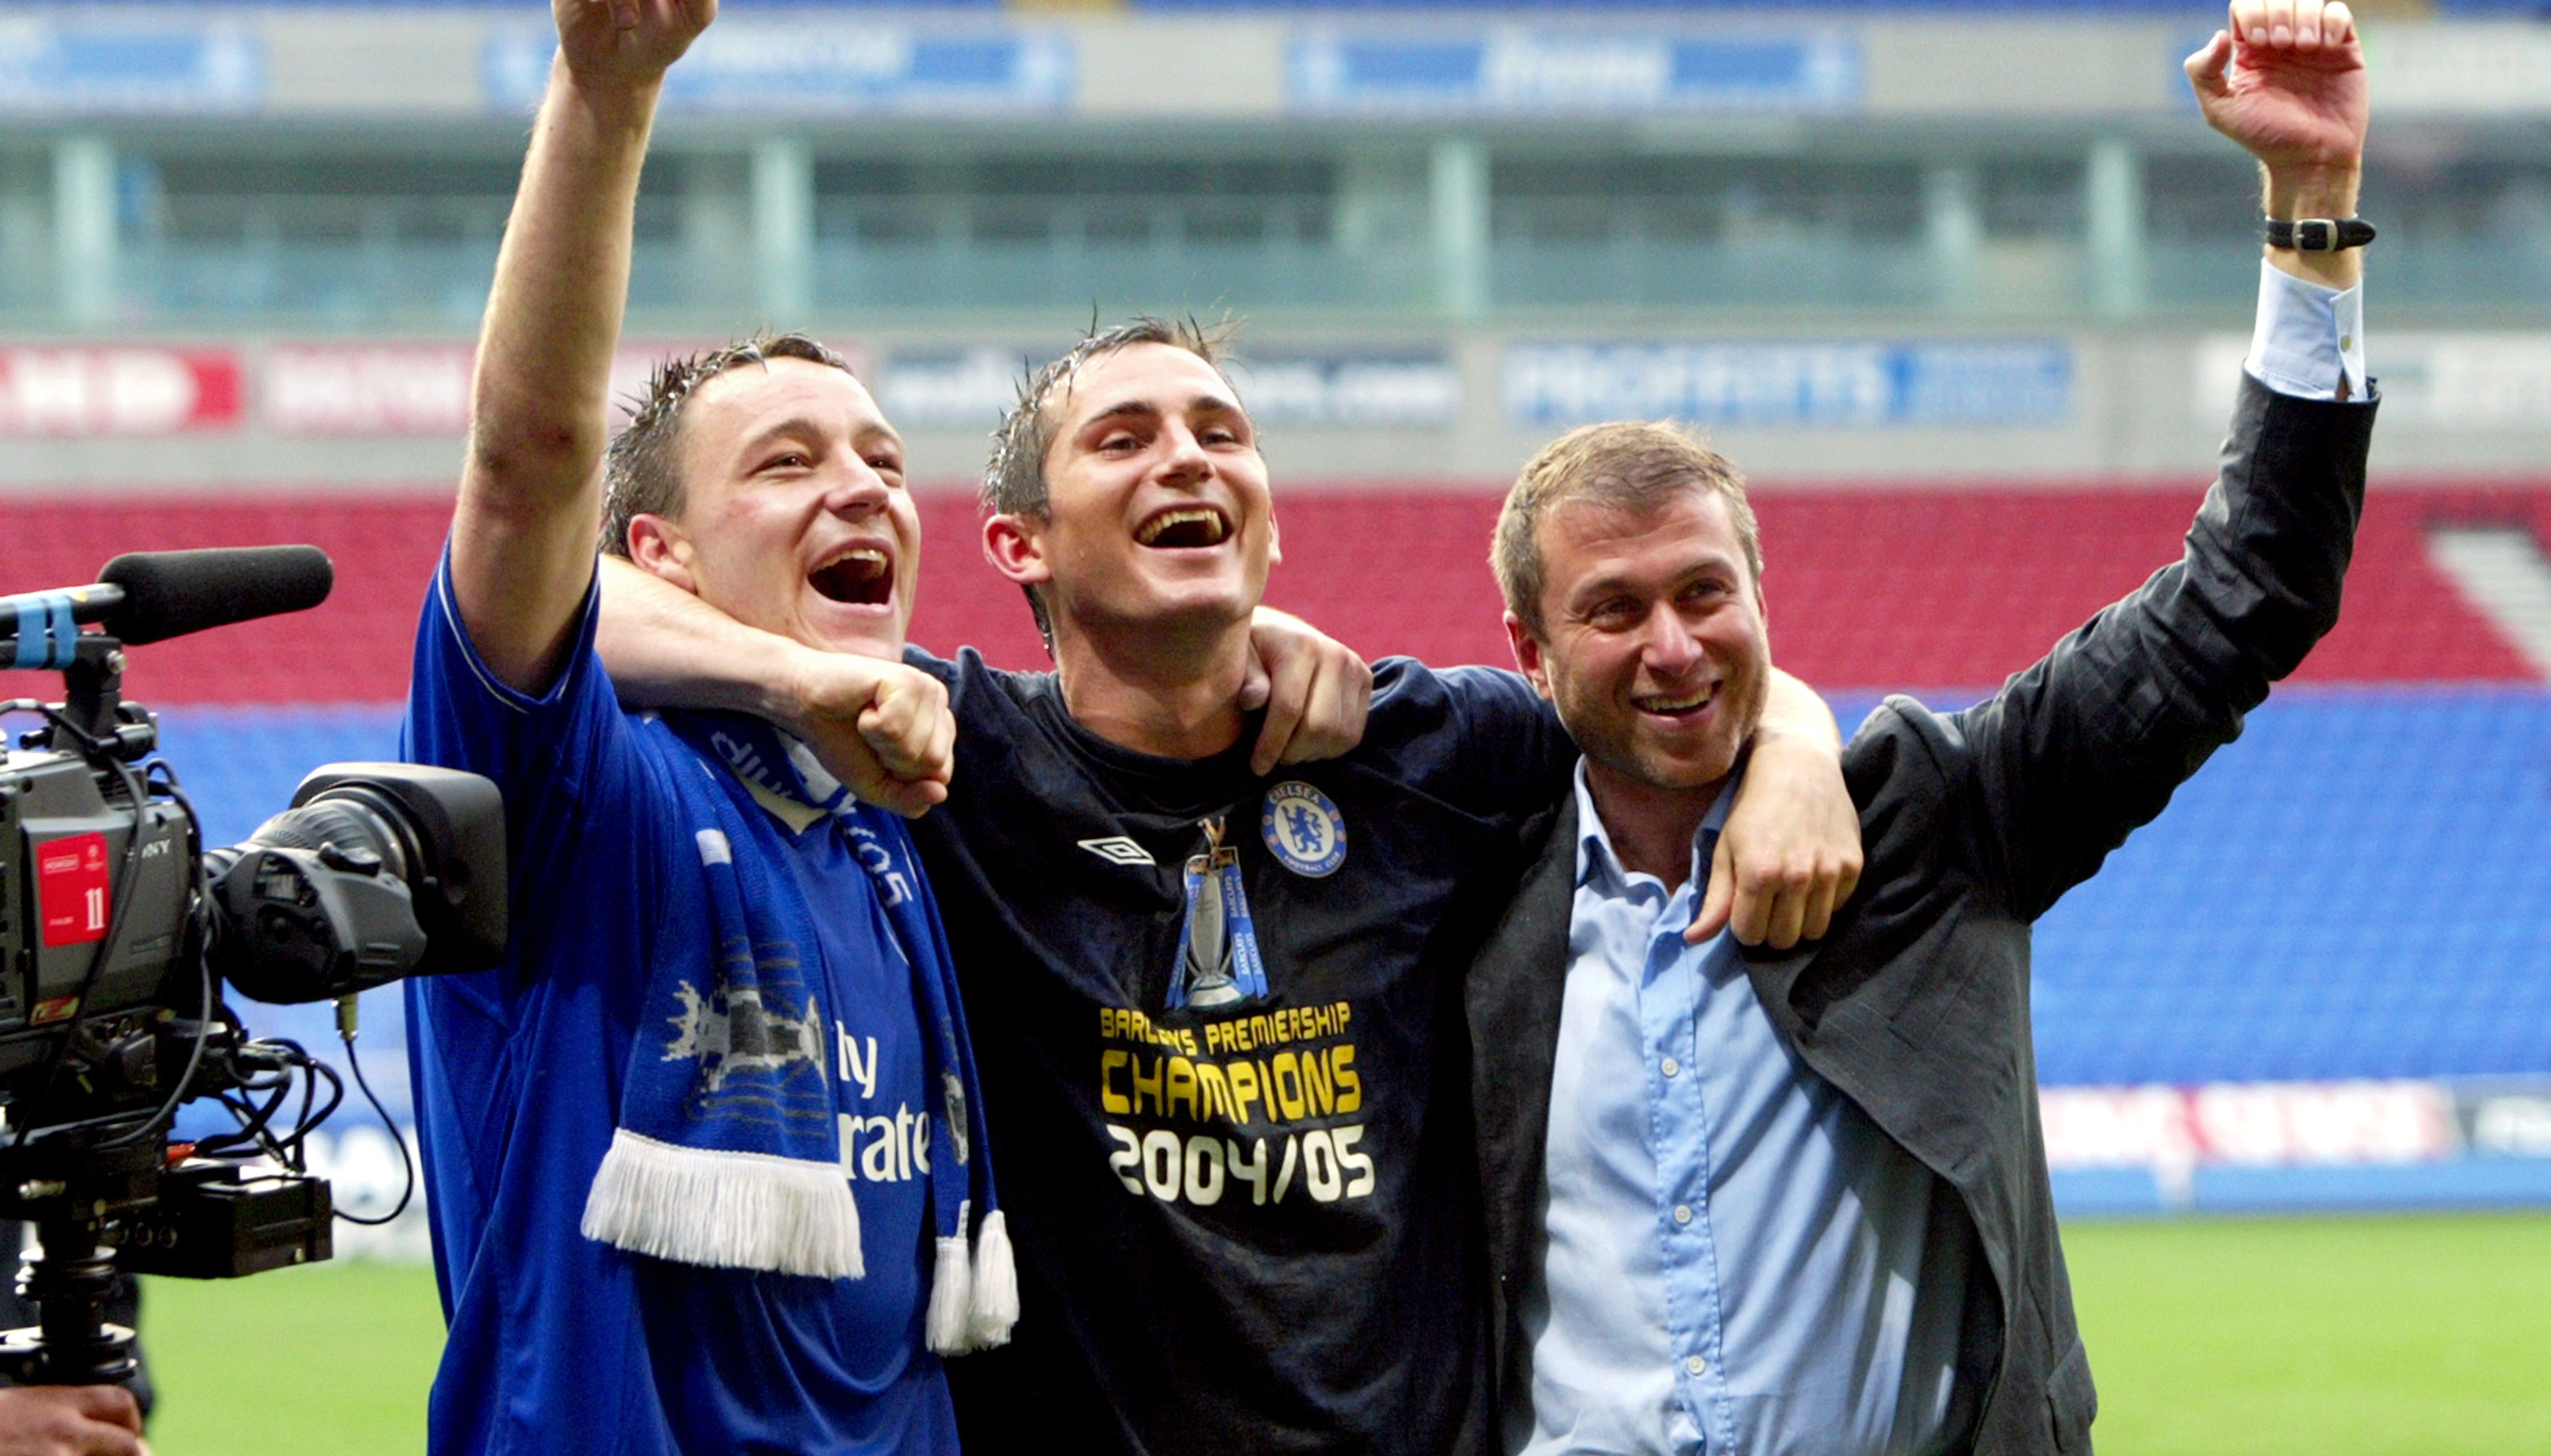 File photo dated 30-04-2005 of Chelsea owner Roman Abramovich (R) celebrates with his players Frank Lampard and John Terry (L). Chelsea owner Roman Abramovich announces he is selling the club Issue date: Wednesday March 2, 2022.